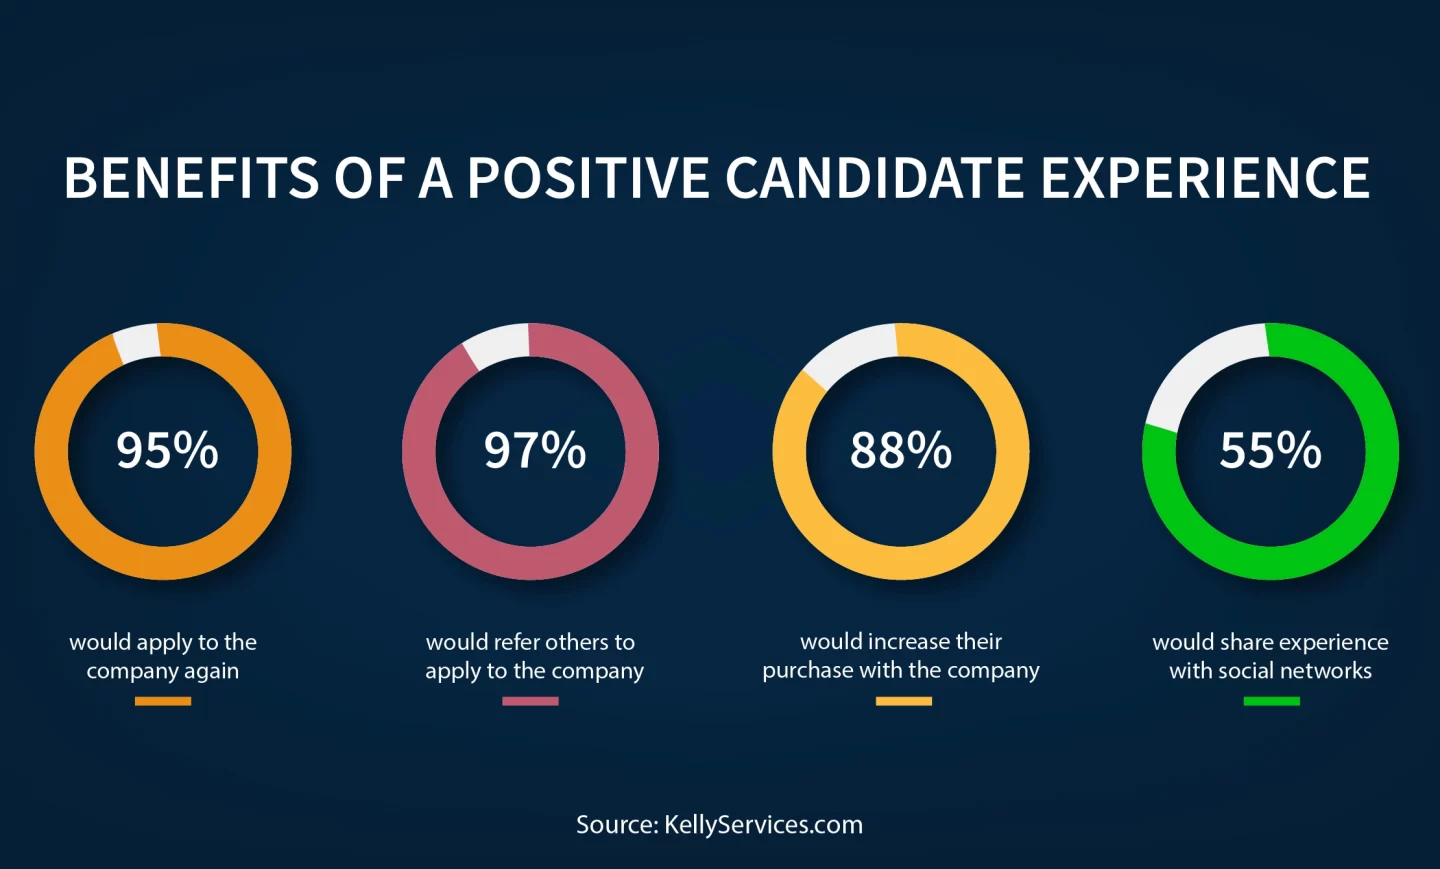 Benefits of a positive candidate experience